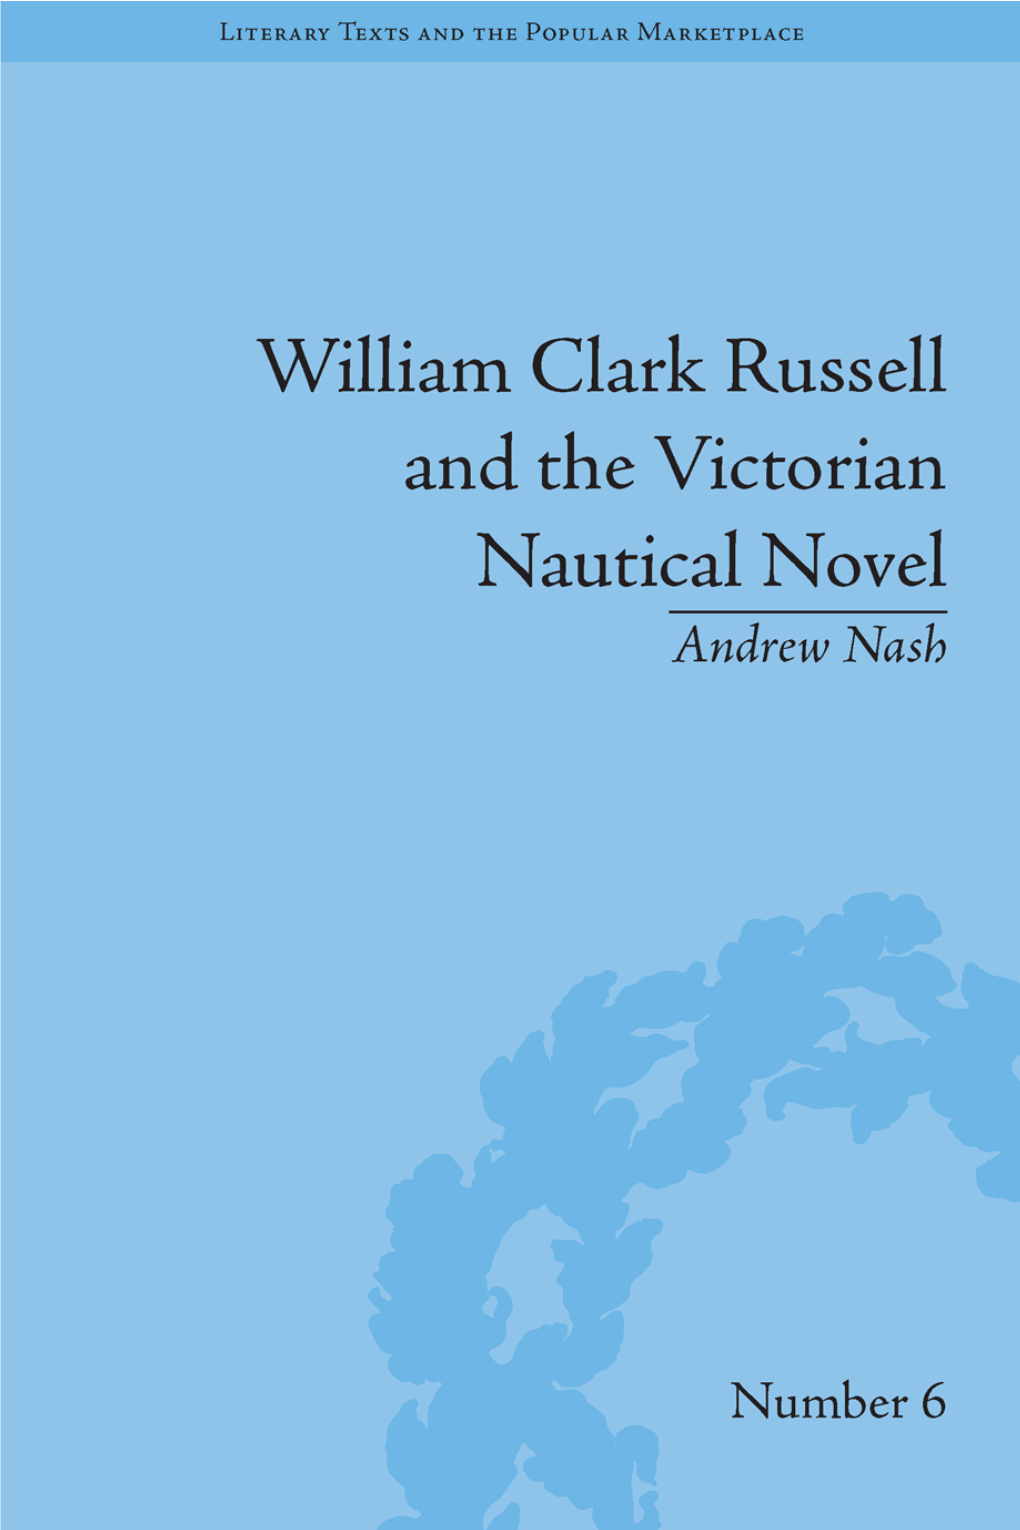 WILLIAM CLARK RUSSELL and the VICTORIAN NAUTICAL NOVEL: GENDER, GENRE and the MARKETPLACE Literary Texts and the Popular Marketplace